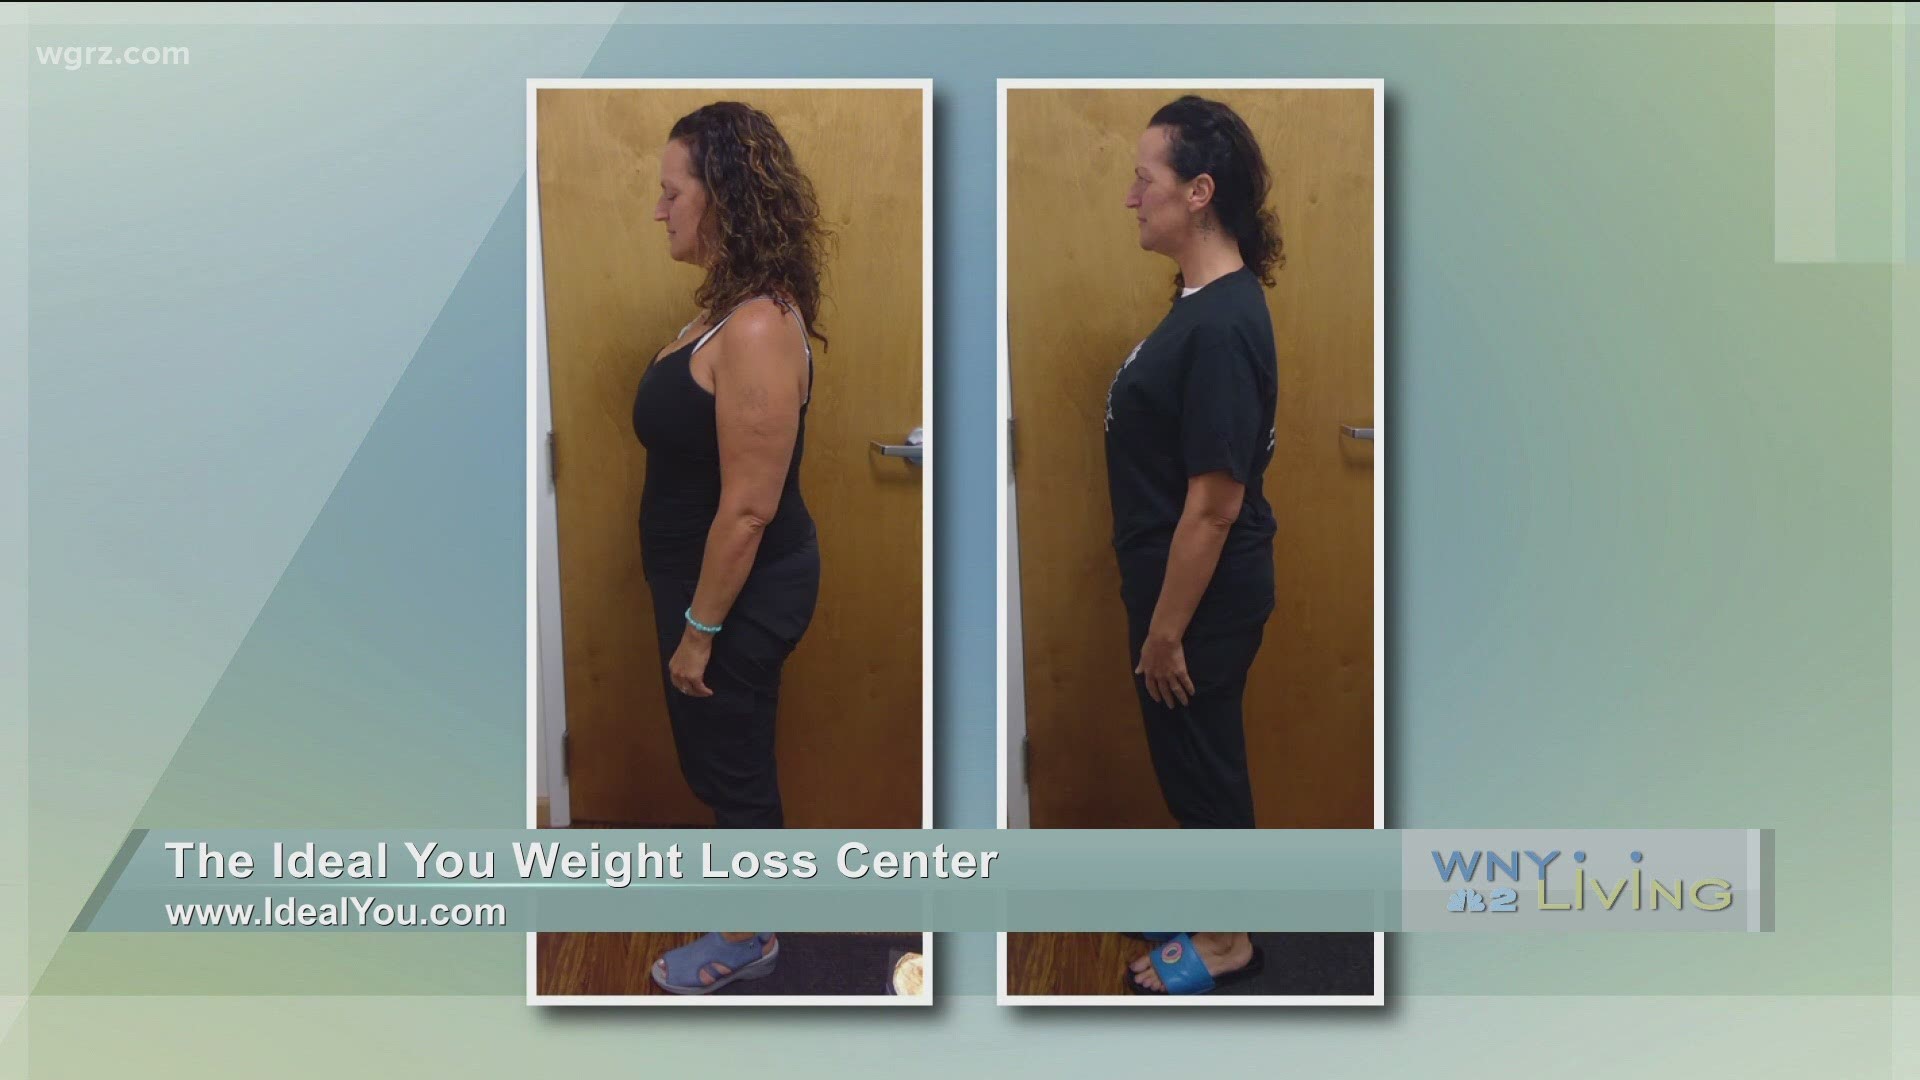 WNY Living - November 7 - The Ideal You Weight Loss Center (THIS VIDEO IS SPONSORED BY THE IDEAL YOU WEIGHT LOSS CENTER)